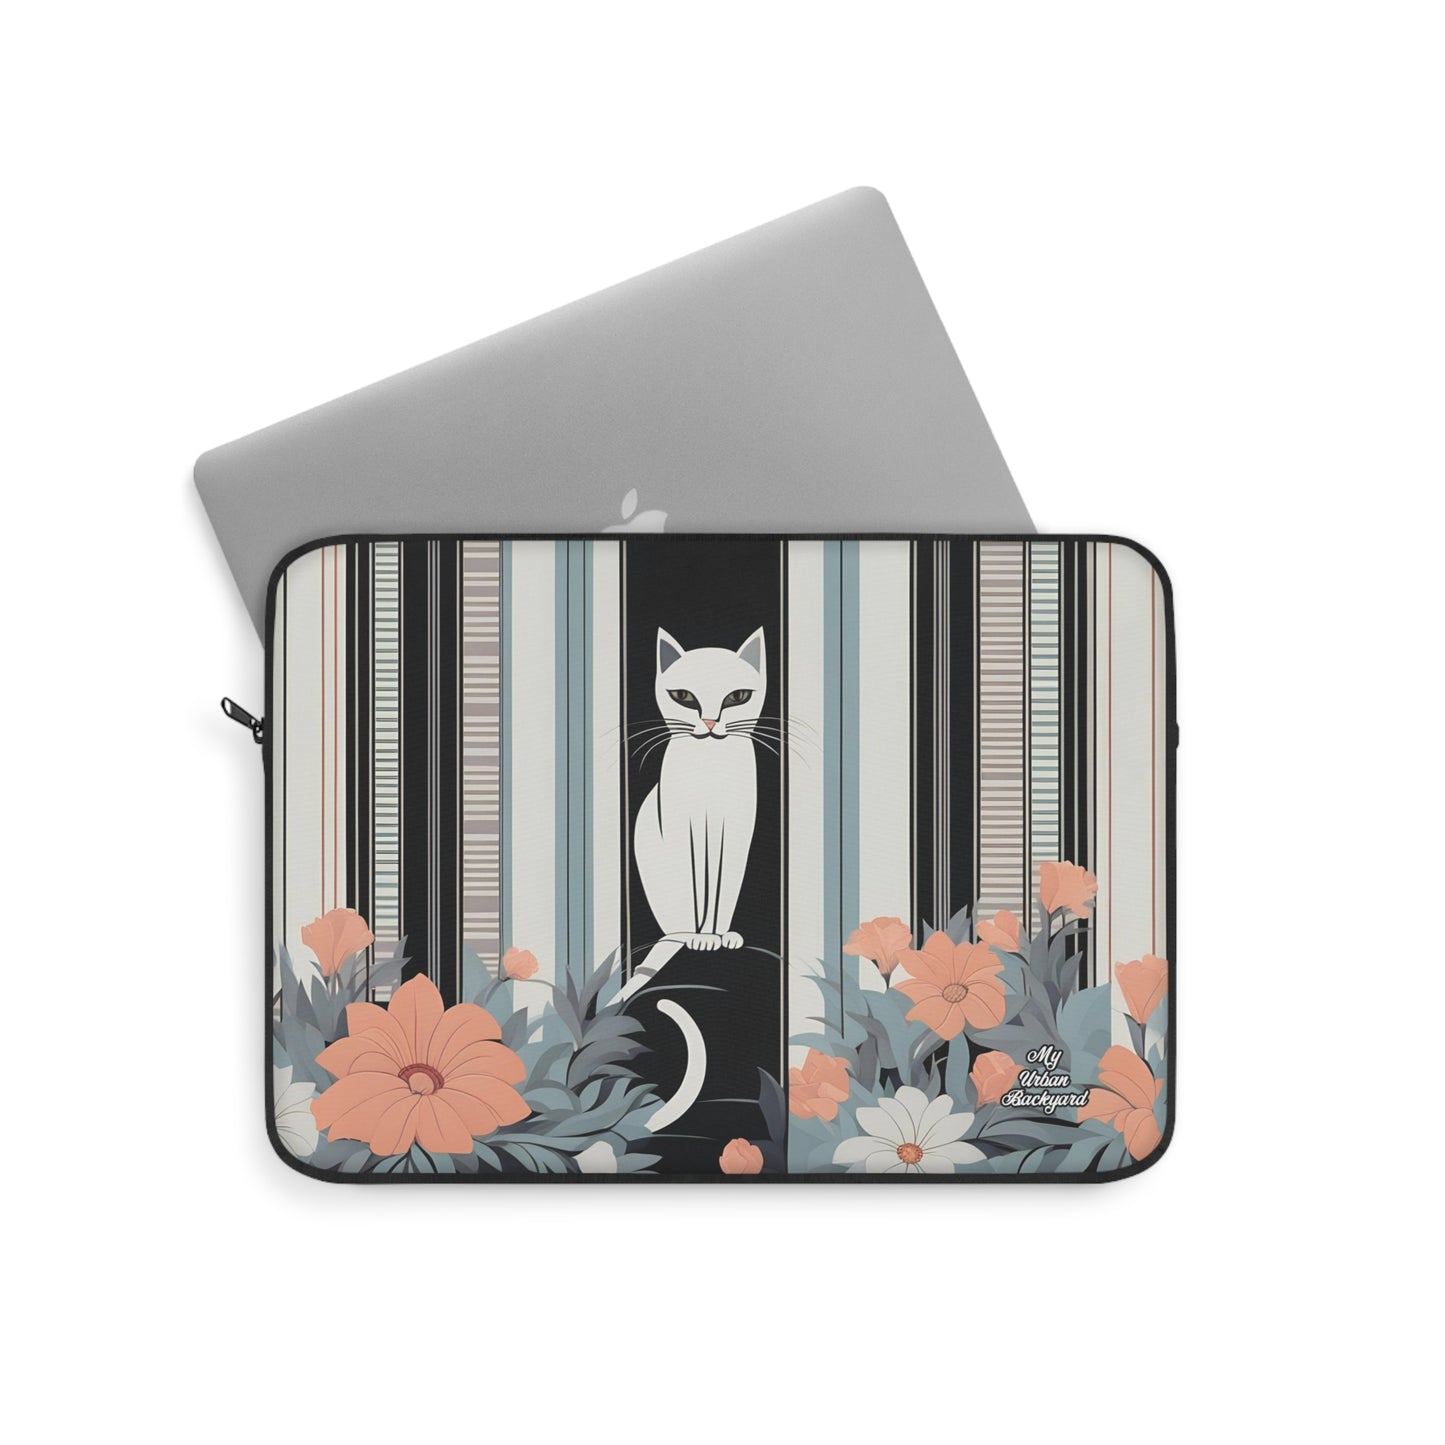 White Cat, Laptop Carrying Case, Top Loading Sleeve for School or Work